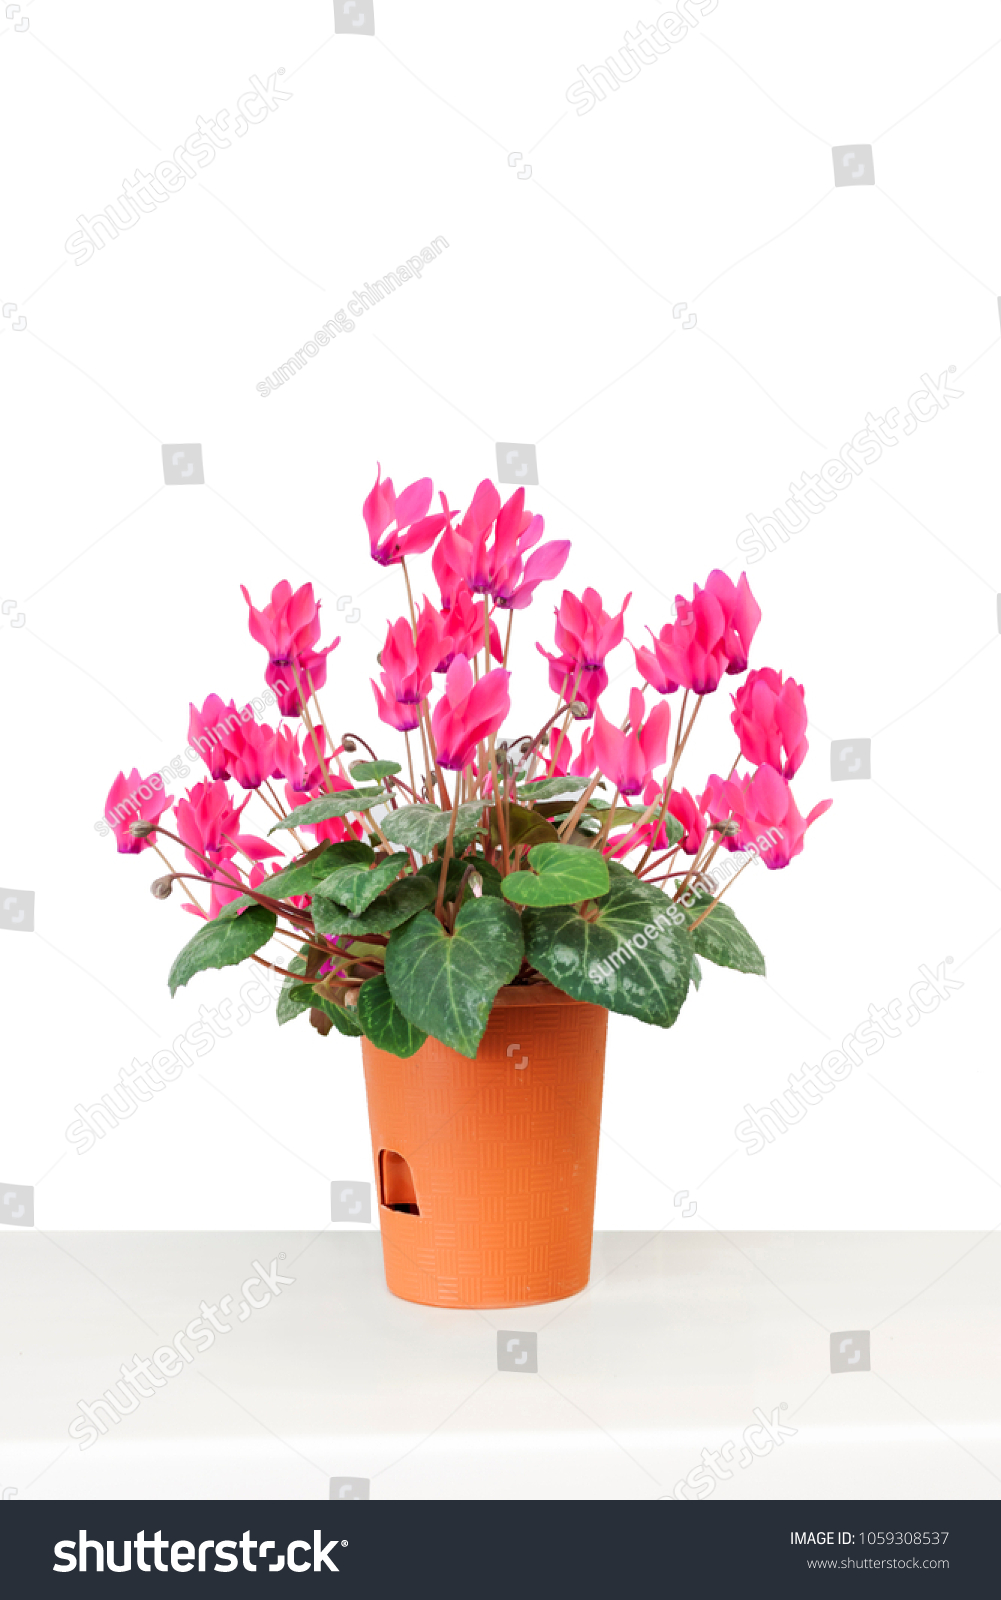 pink flower in pot on table #1059308537